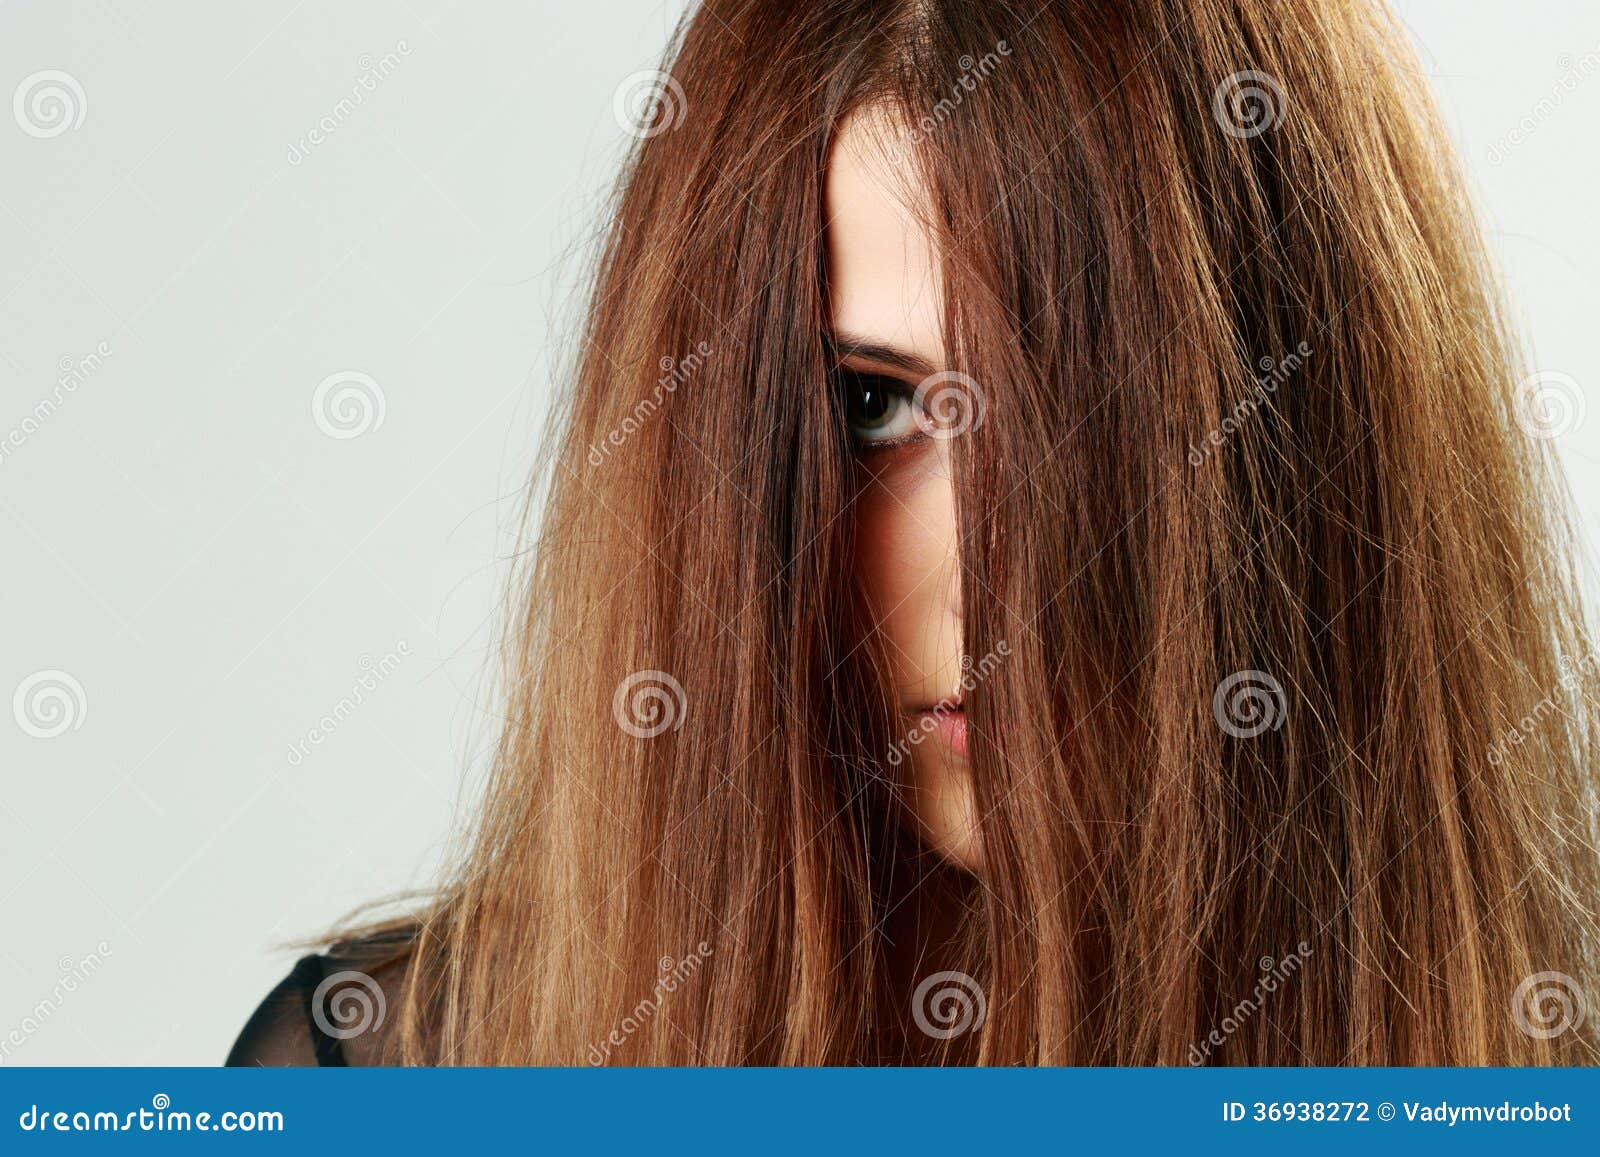 Young Woman Face Covered with Hair Stock Photo - Image of dermatology,  problem: 36938272